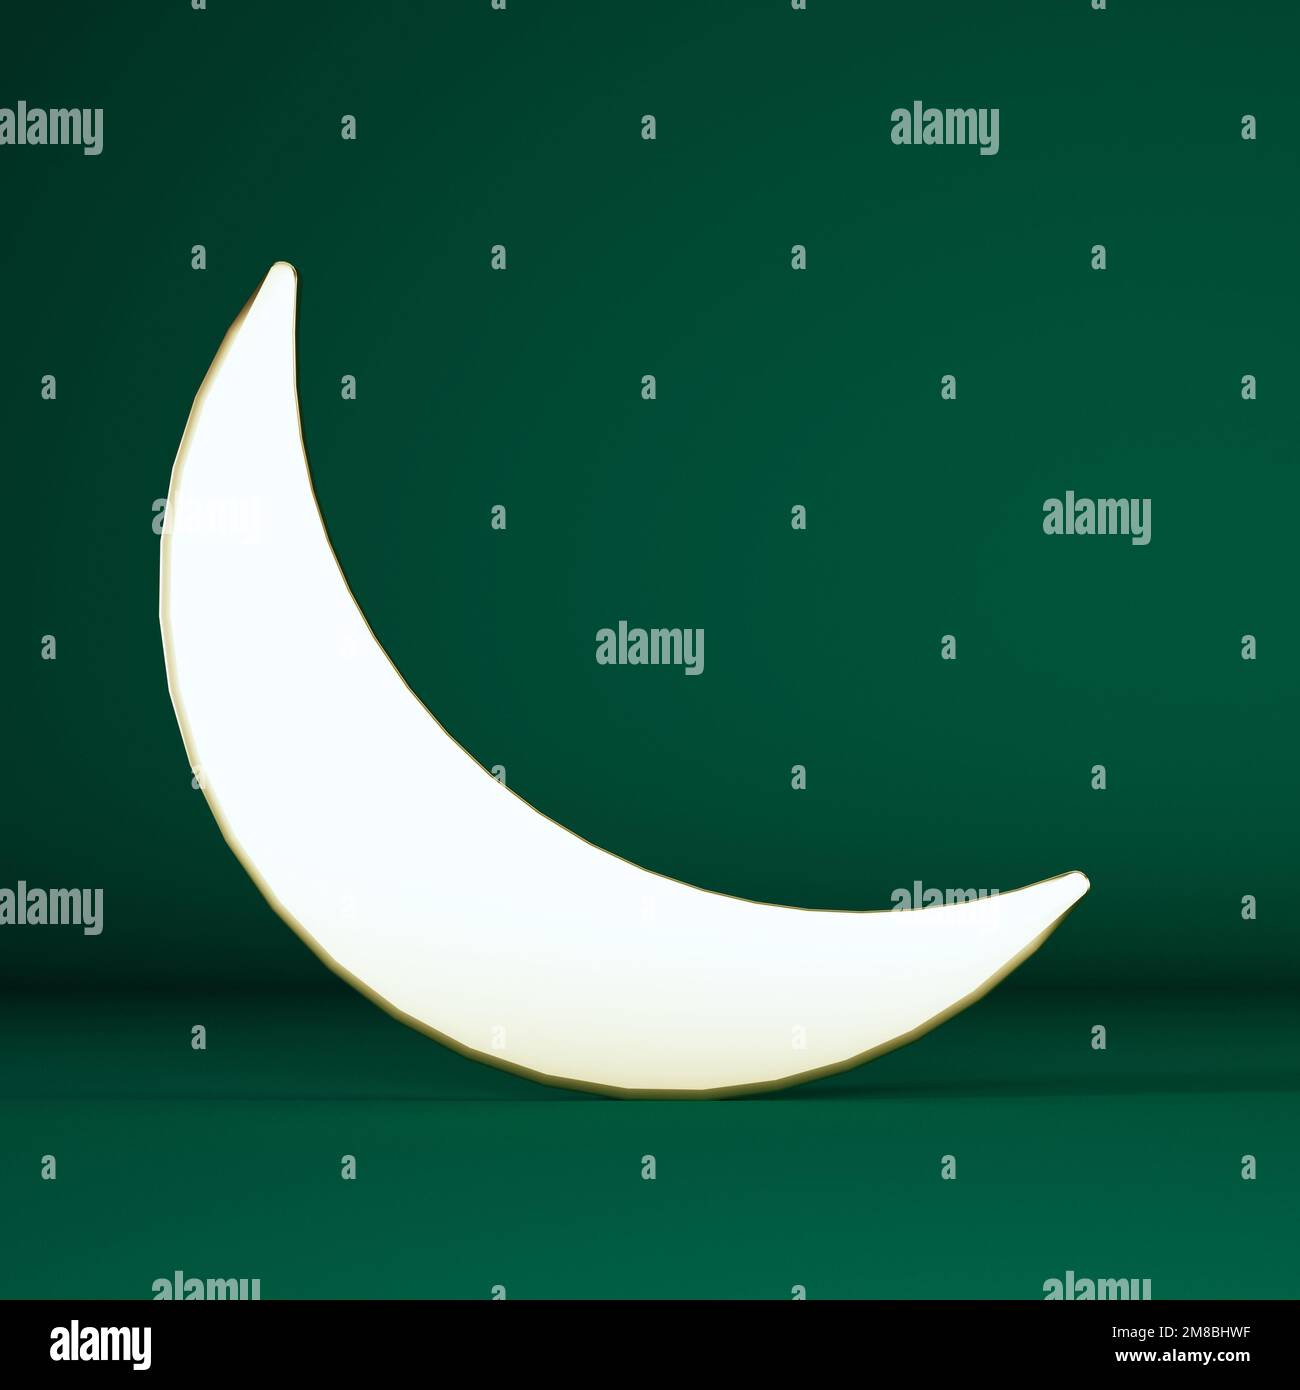 Ramadan green background with crescent moon and copy space, 3d rendering. Stock Photo